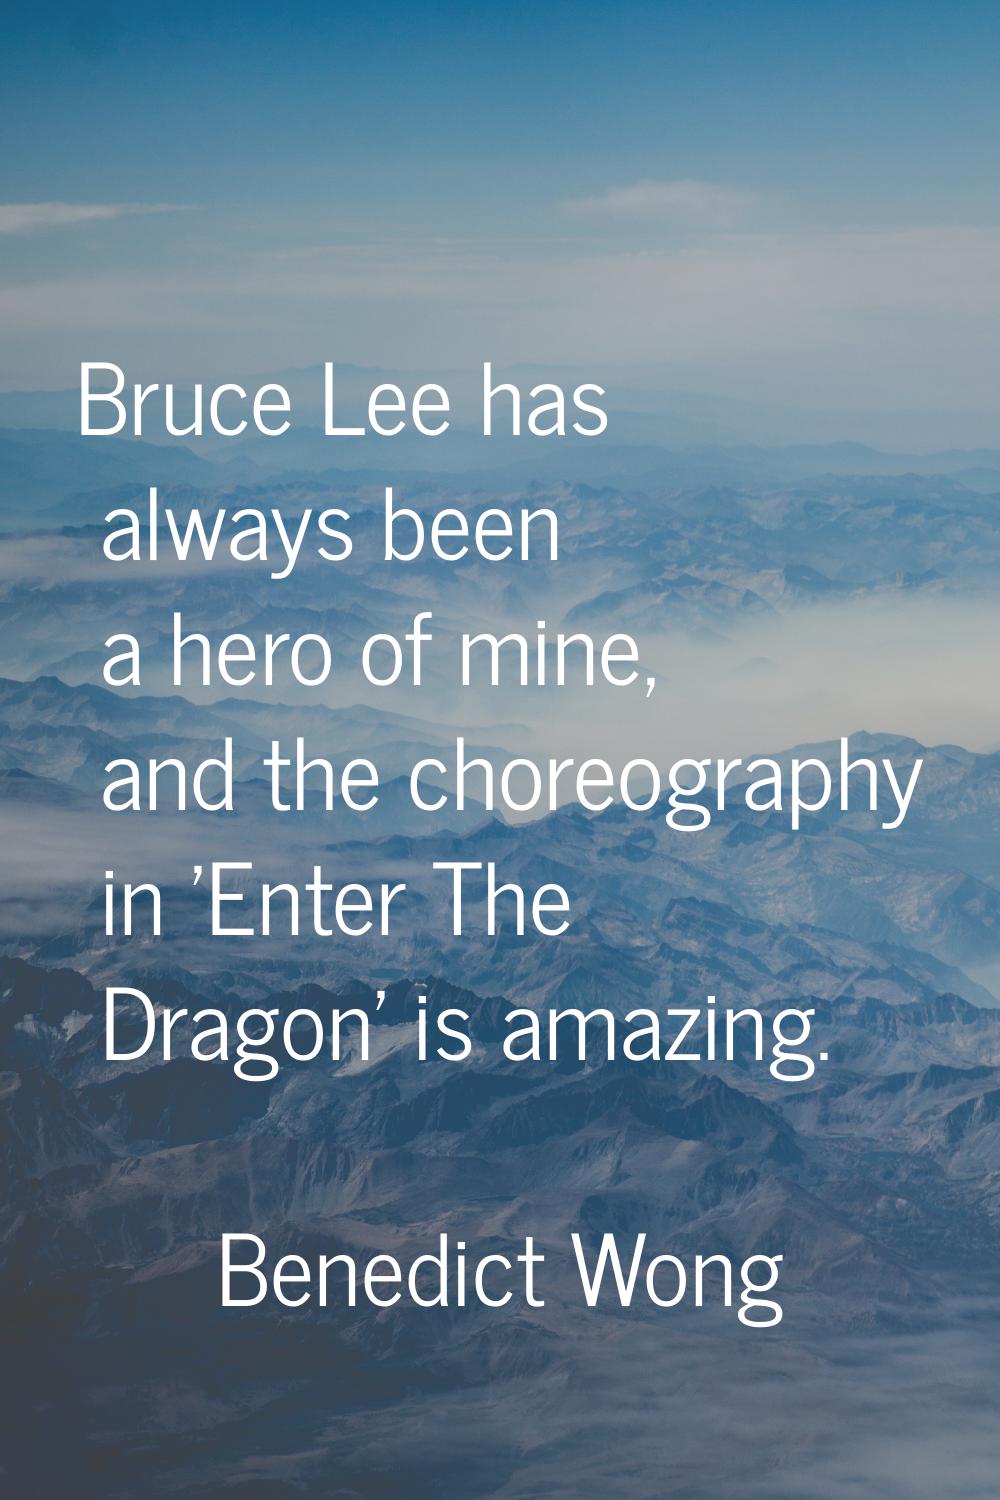 Bruce Lee has always been a hero of mine, and the choreography in 'Enter The Dragon' is amazing.